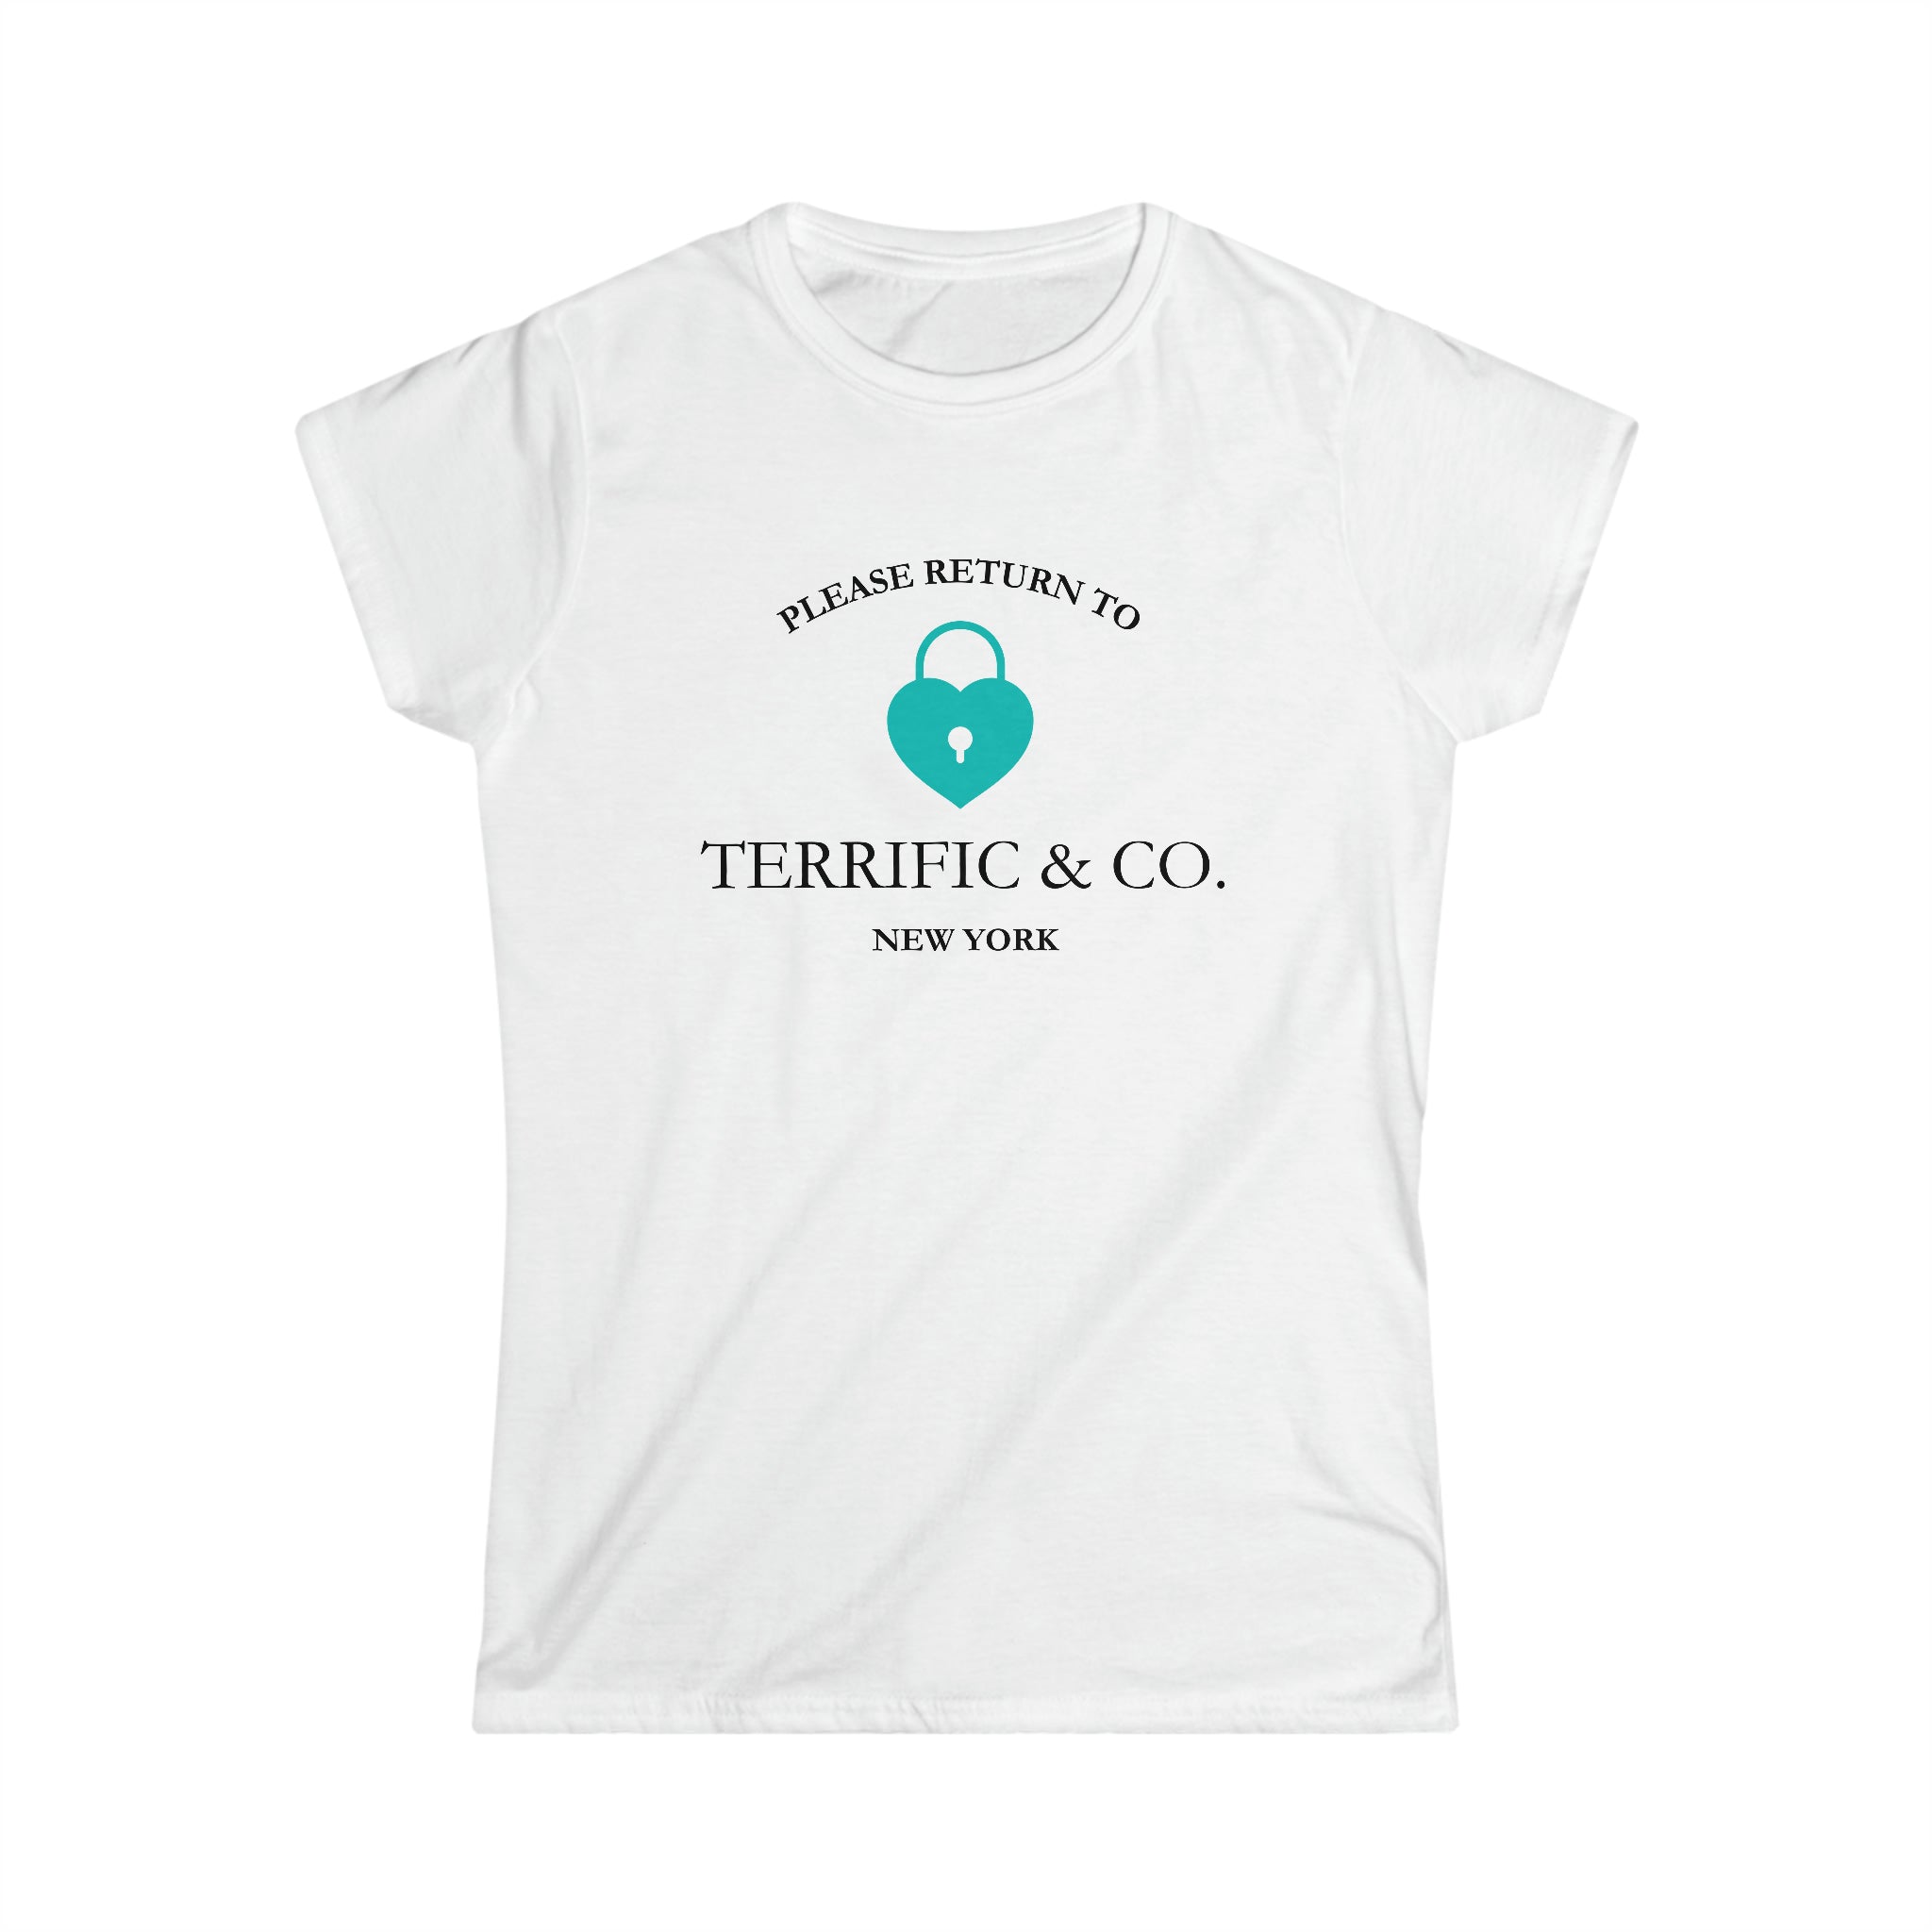 Please Return To Terrific and Co. (Lock) Designer inspired Women's Softstyle Tee, Women's Fashion Tshirt T-Shirt White-2XL The Middle Aged Groove